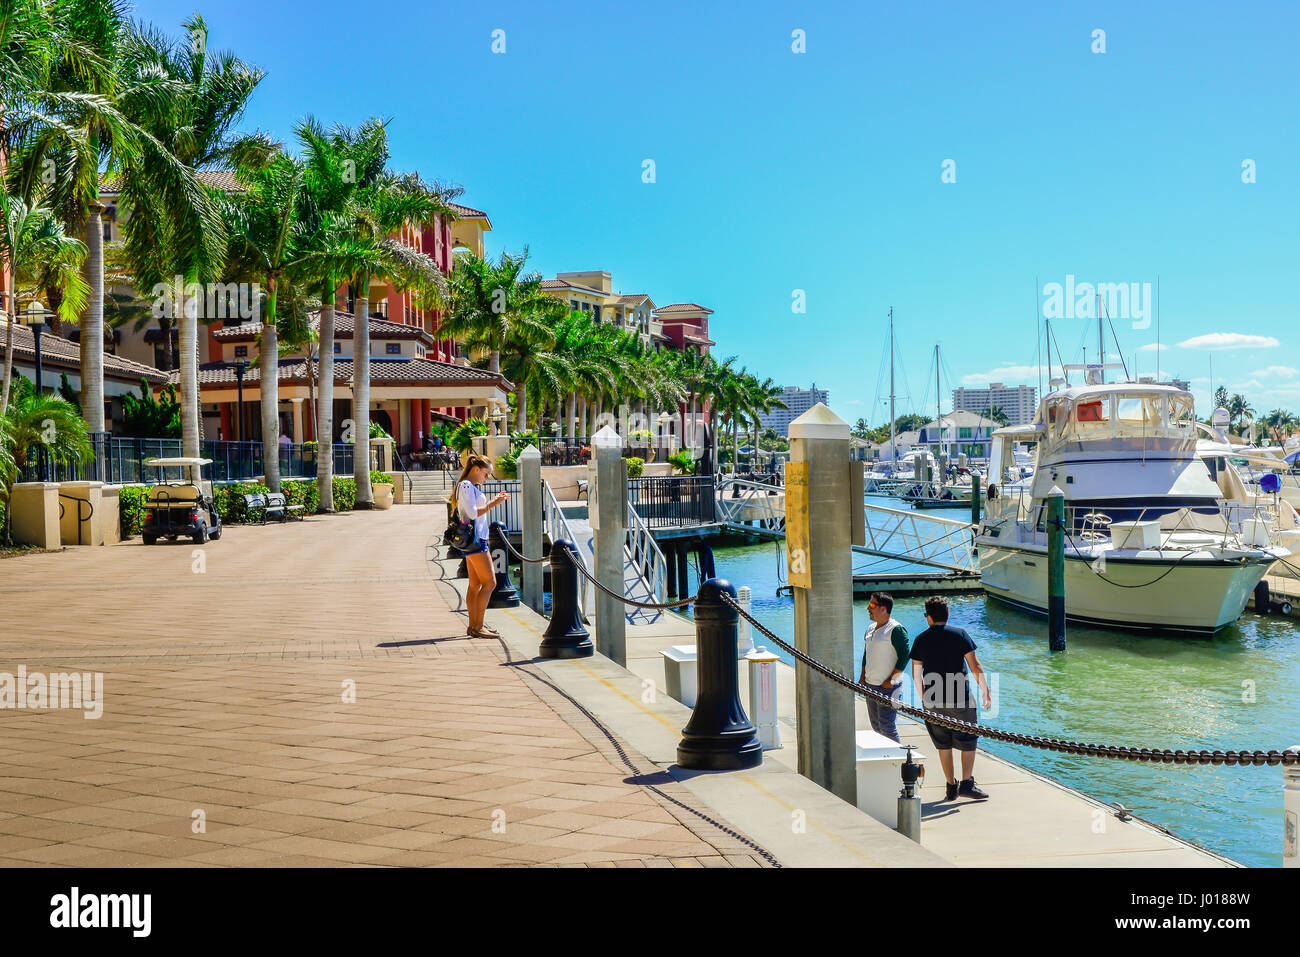 The esplanade waterfront lined with upmarket buildings and palm trees with people and boats on Smokehouse Bay on Marco Island, FL Stock Photo